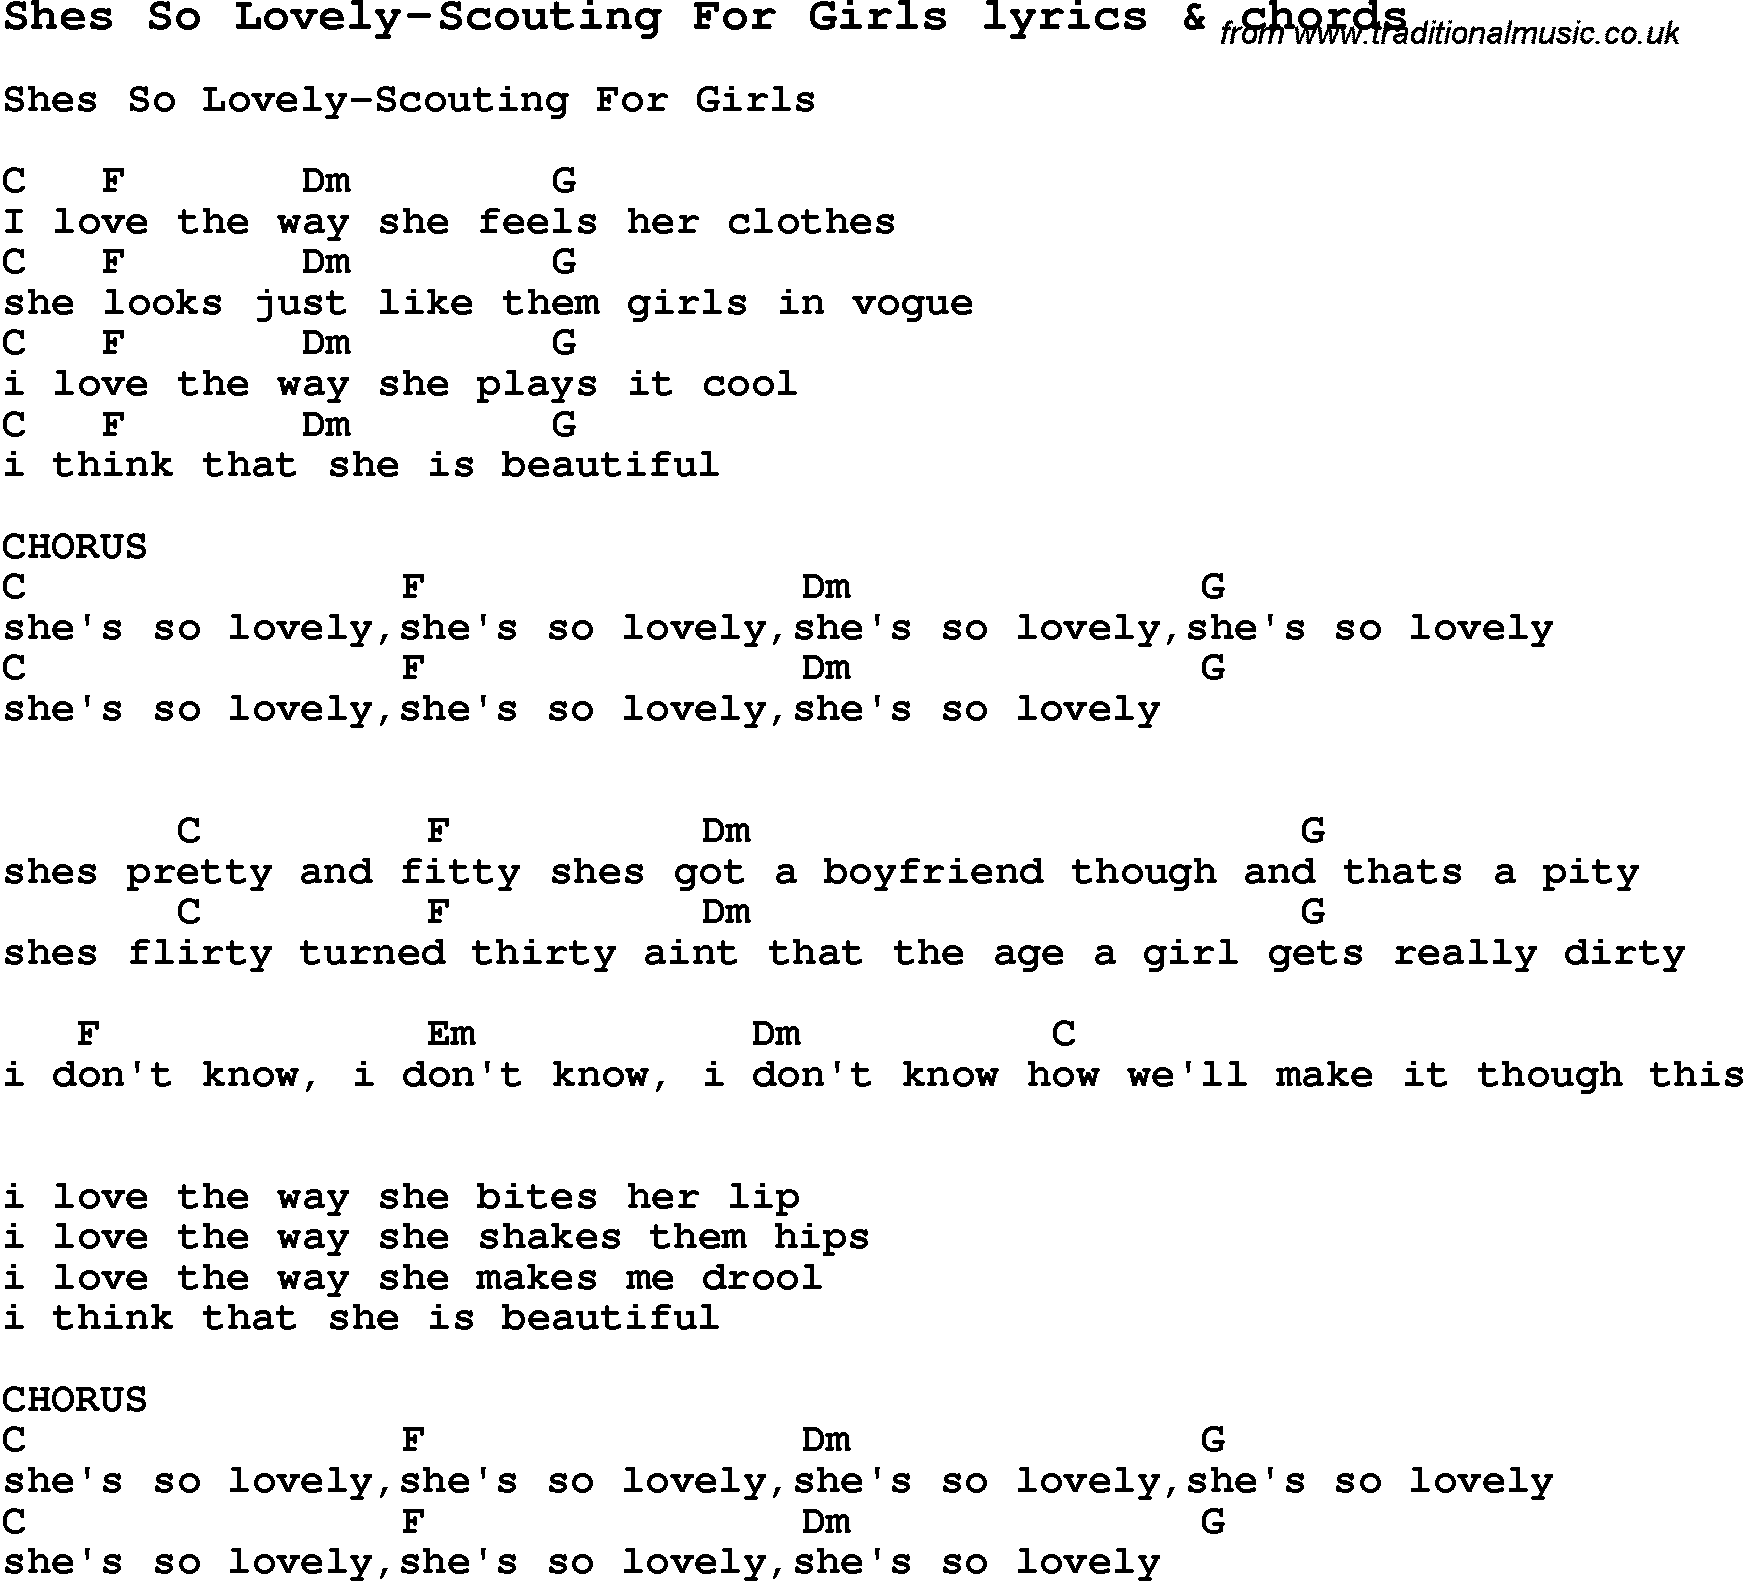 Love Song Lyrics for: Shes So Lovely-Scouting For Girls with chords for Ukulele, Guitar Banjo etc.